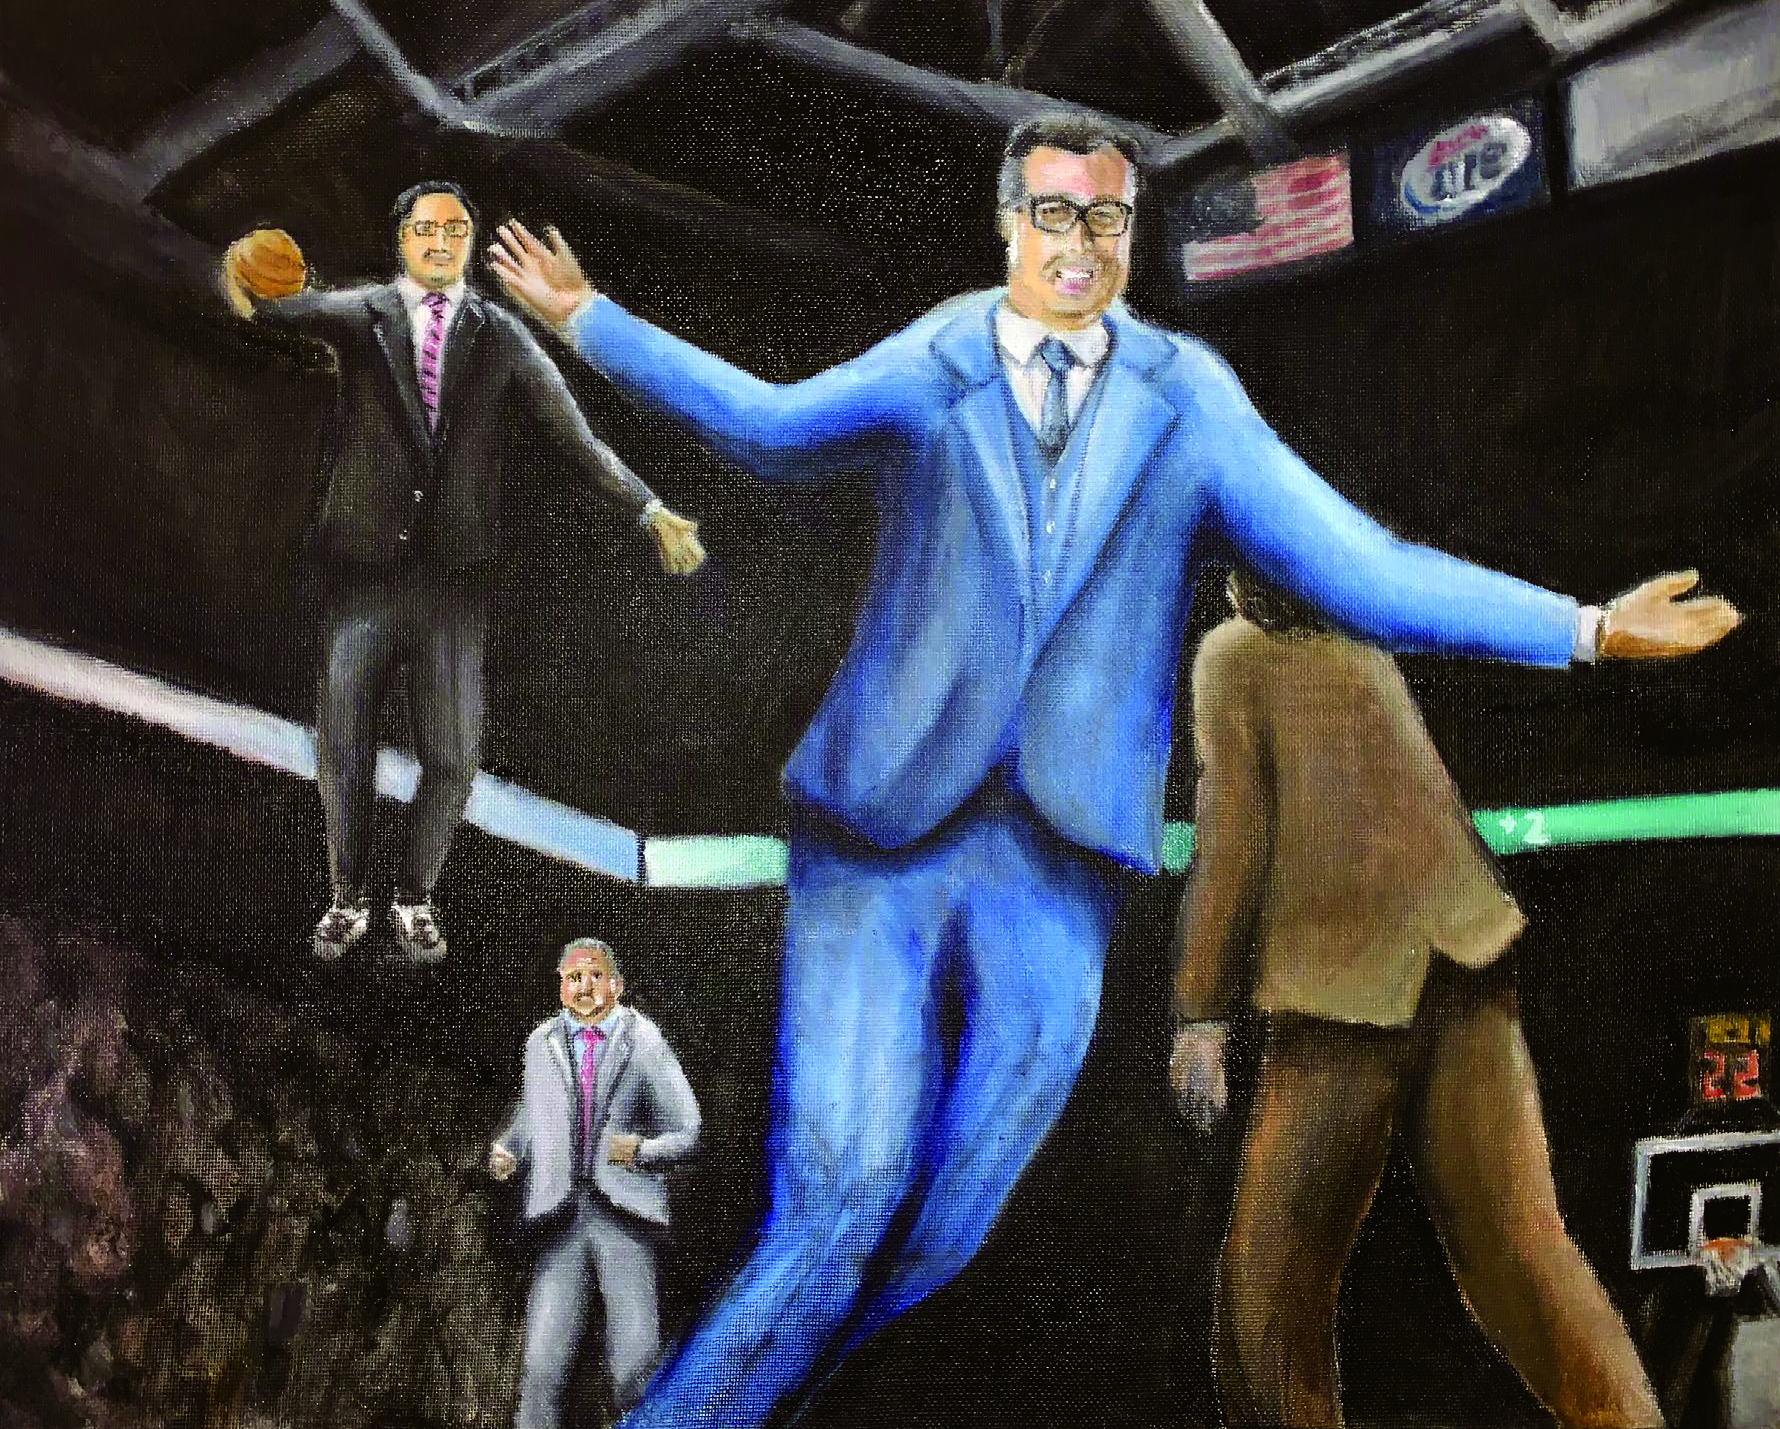 Painting of men in suits floating on basketball court.